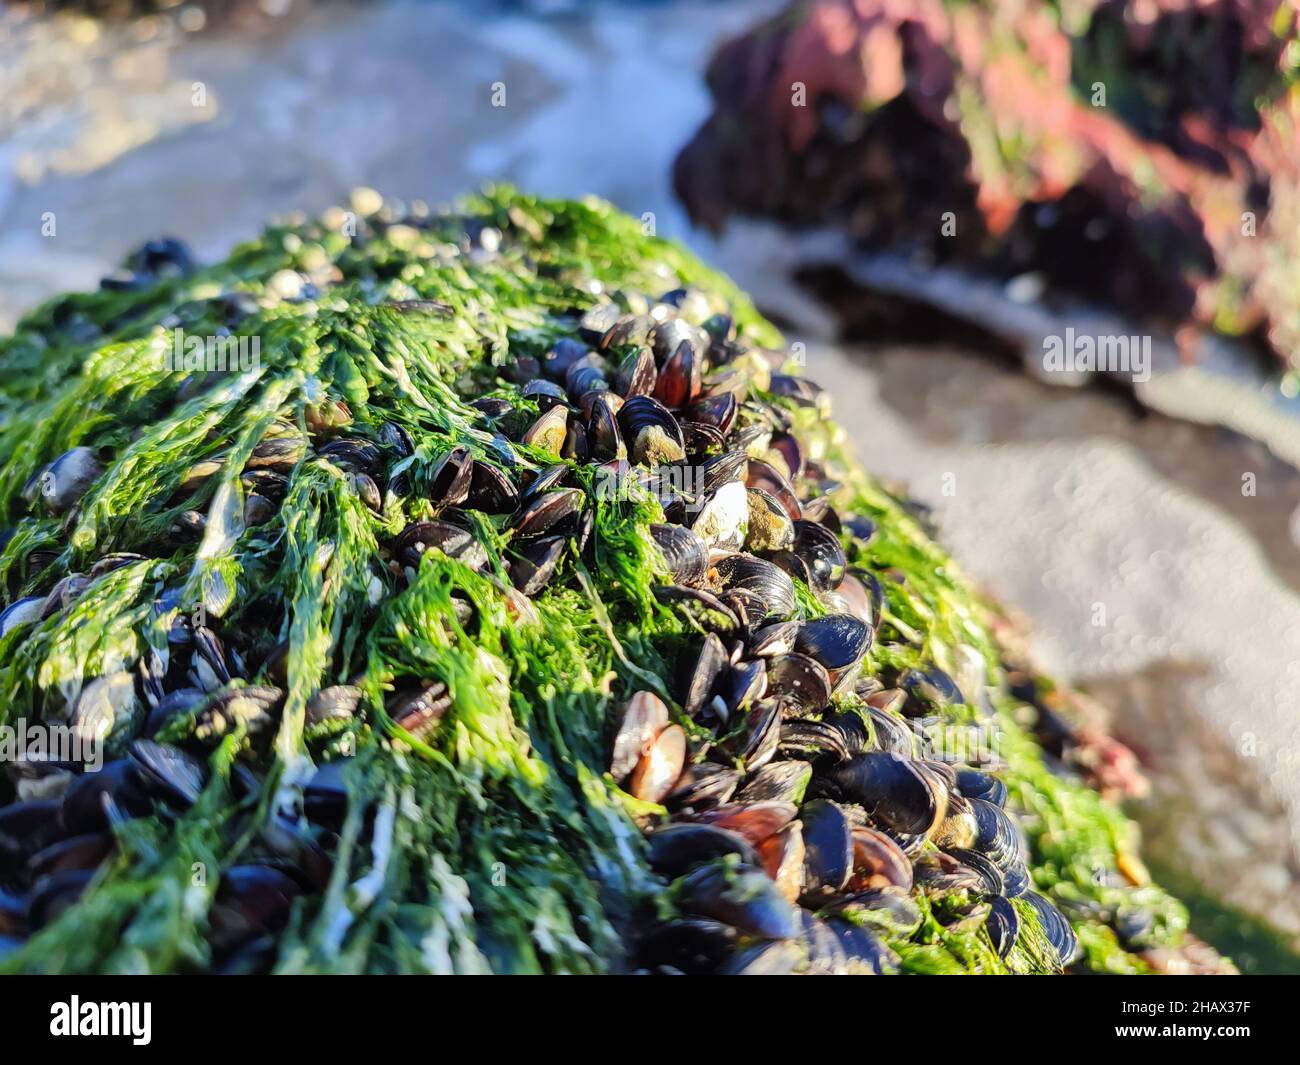 Group of fresh edible common mussels or mollusks on sea rock Stock Photo